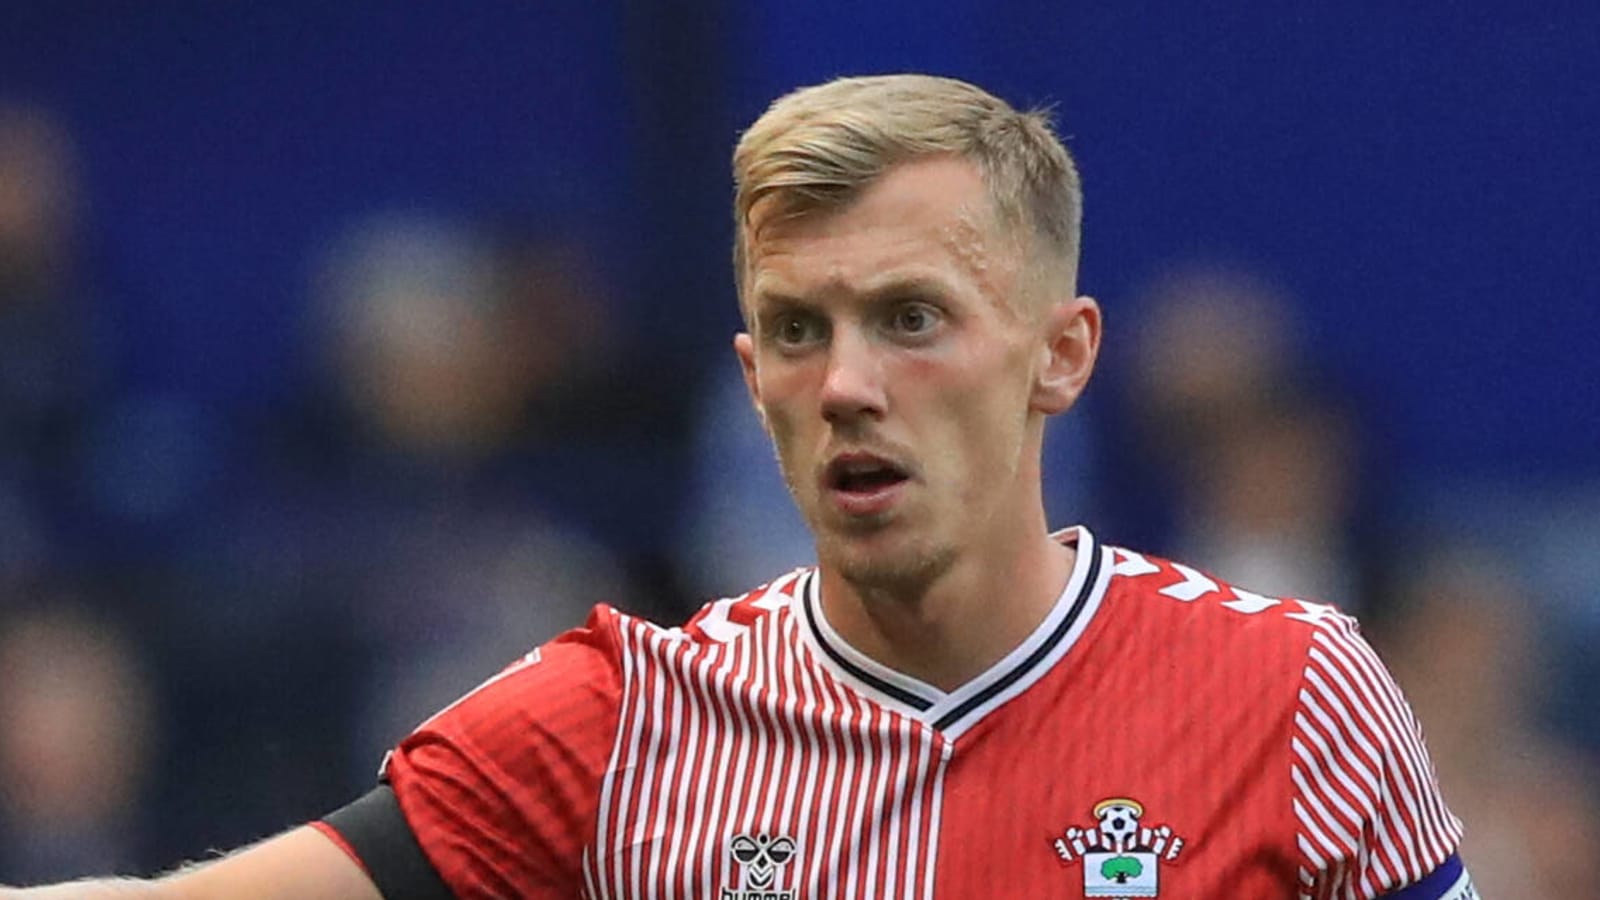 'If I’m Ward-Prowse' – Sky Sports pundit warns Ward-Prowse against joining Premier League side